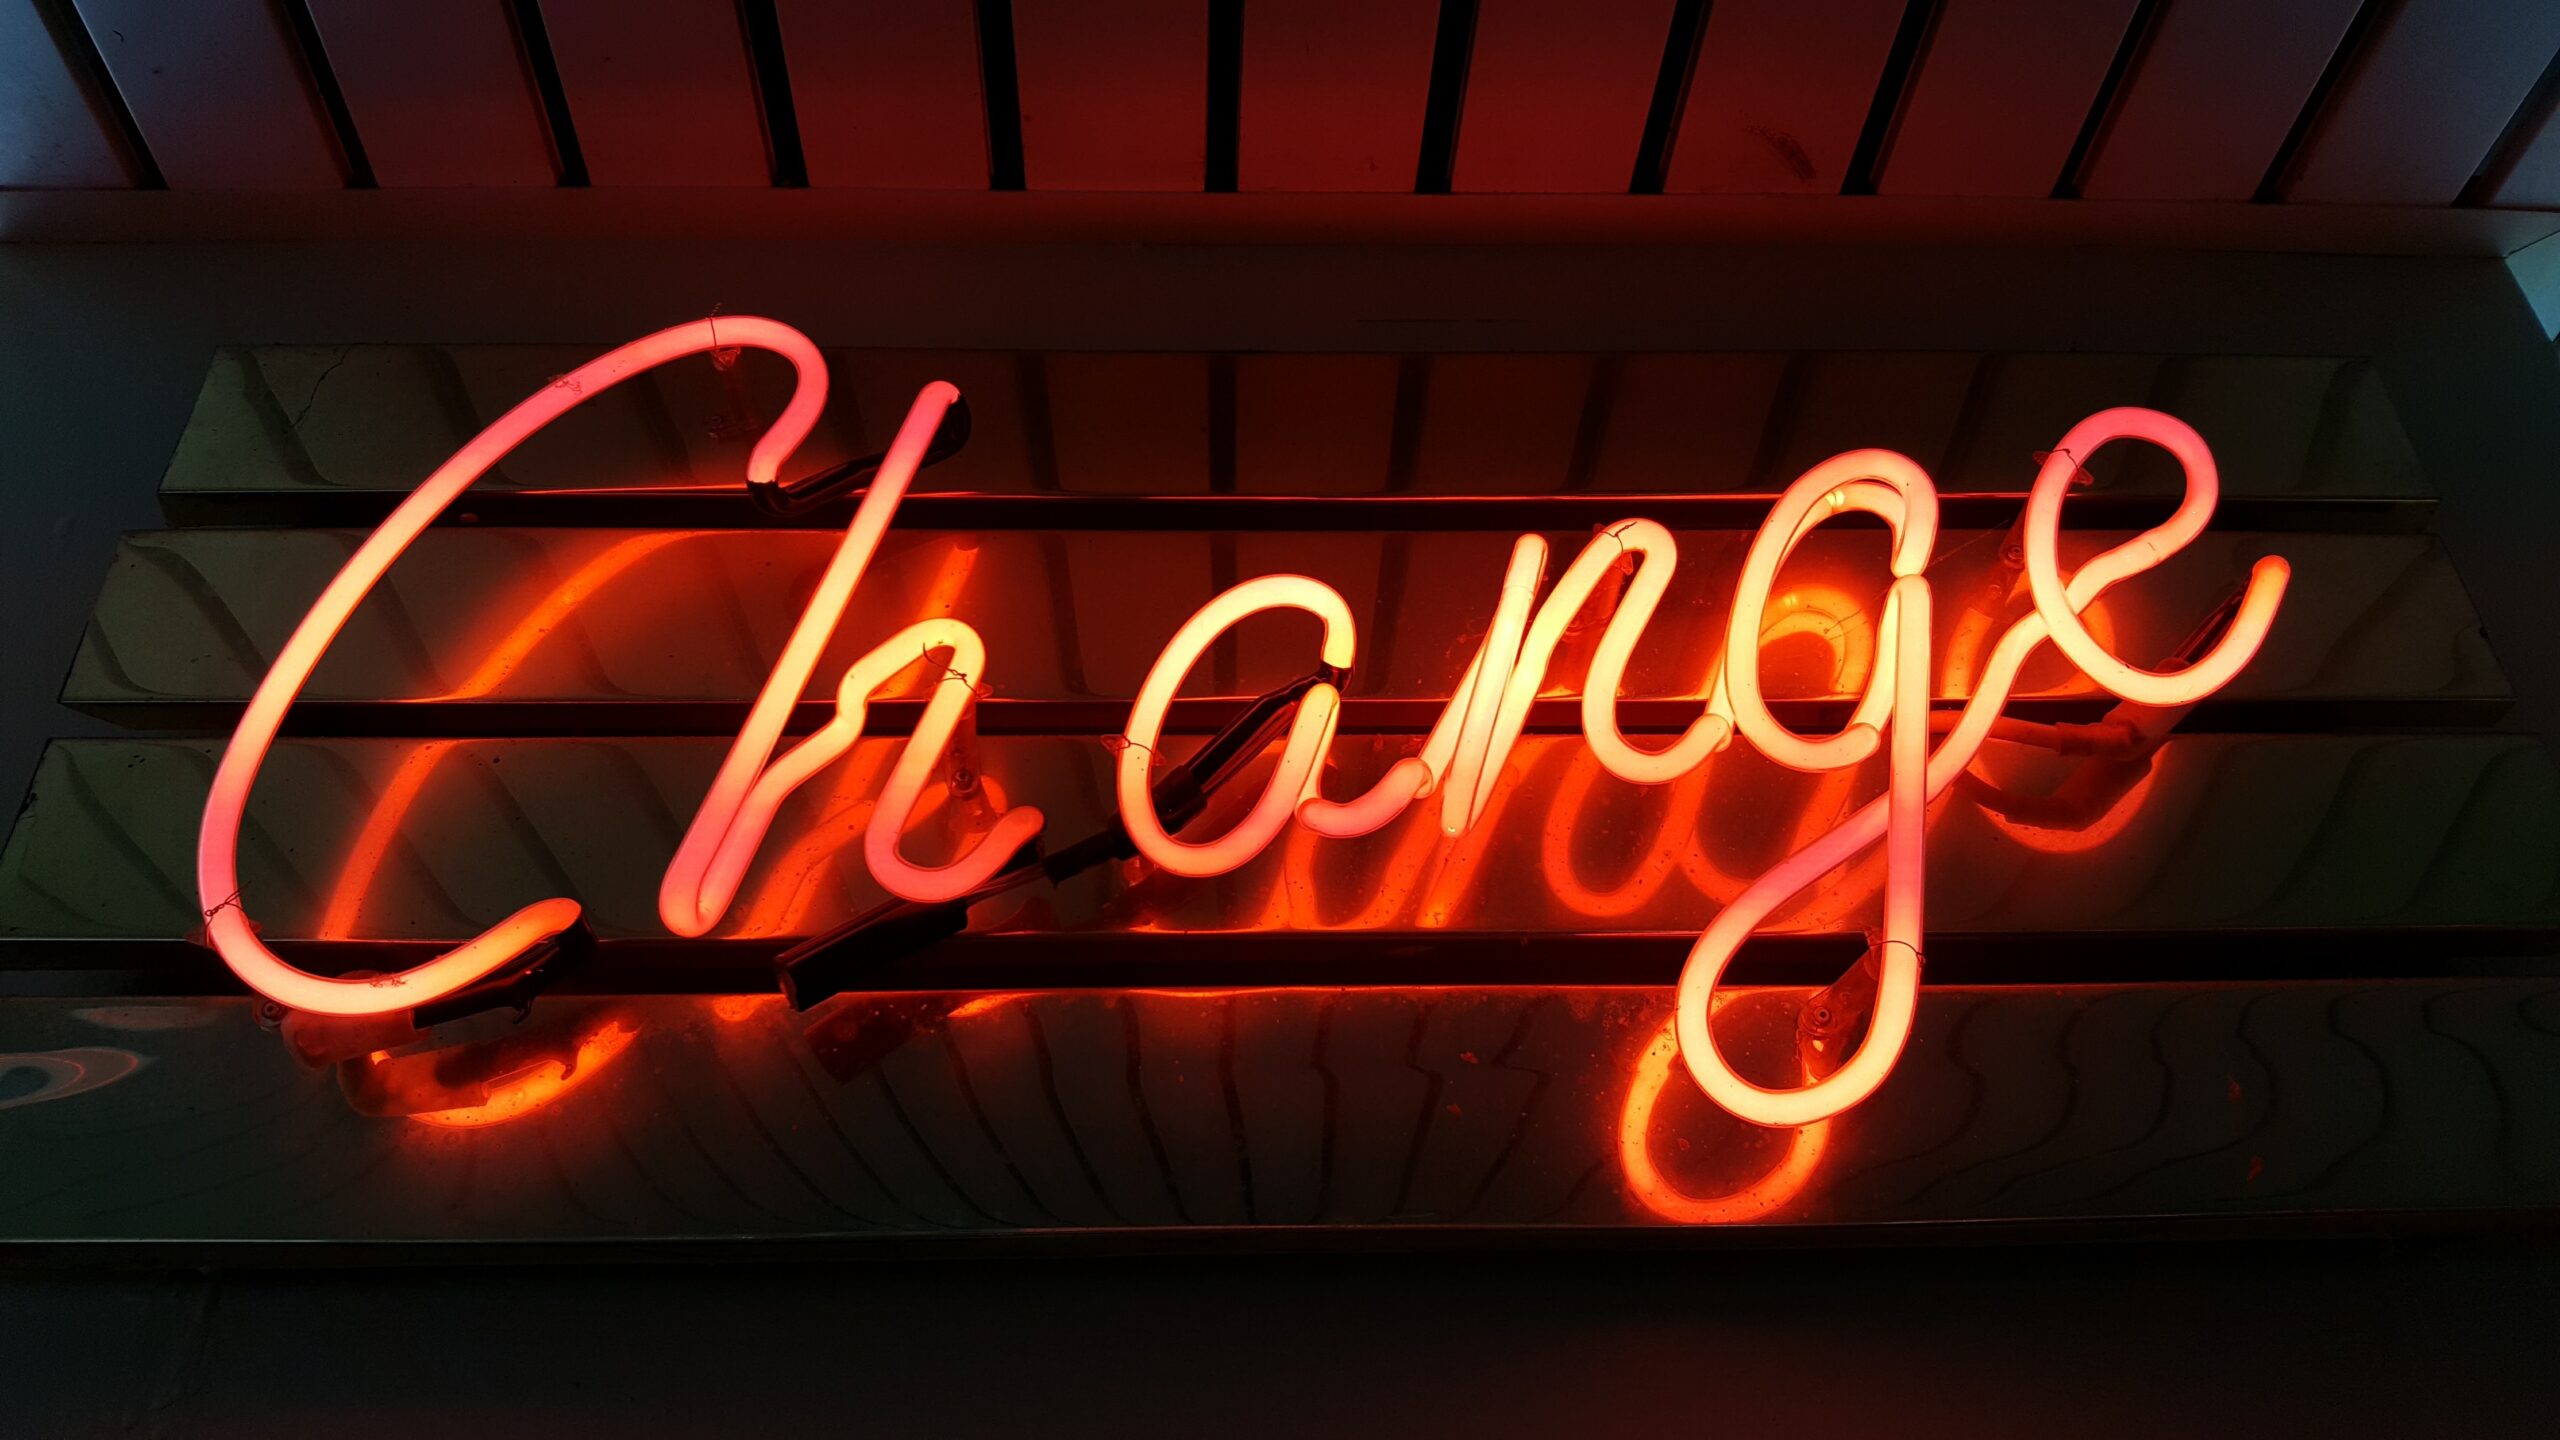 Change management is a foundational component of EDIB